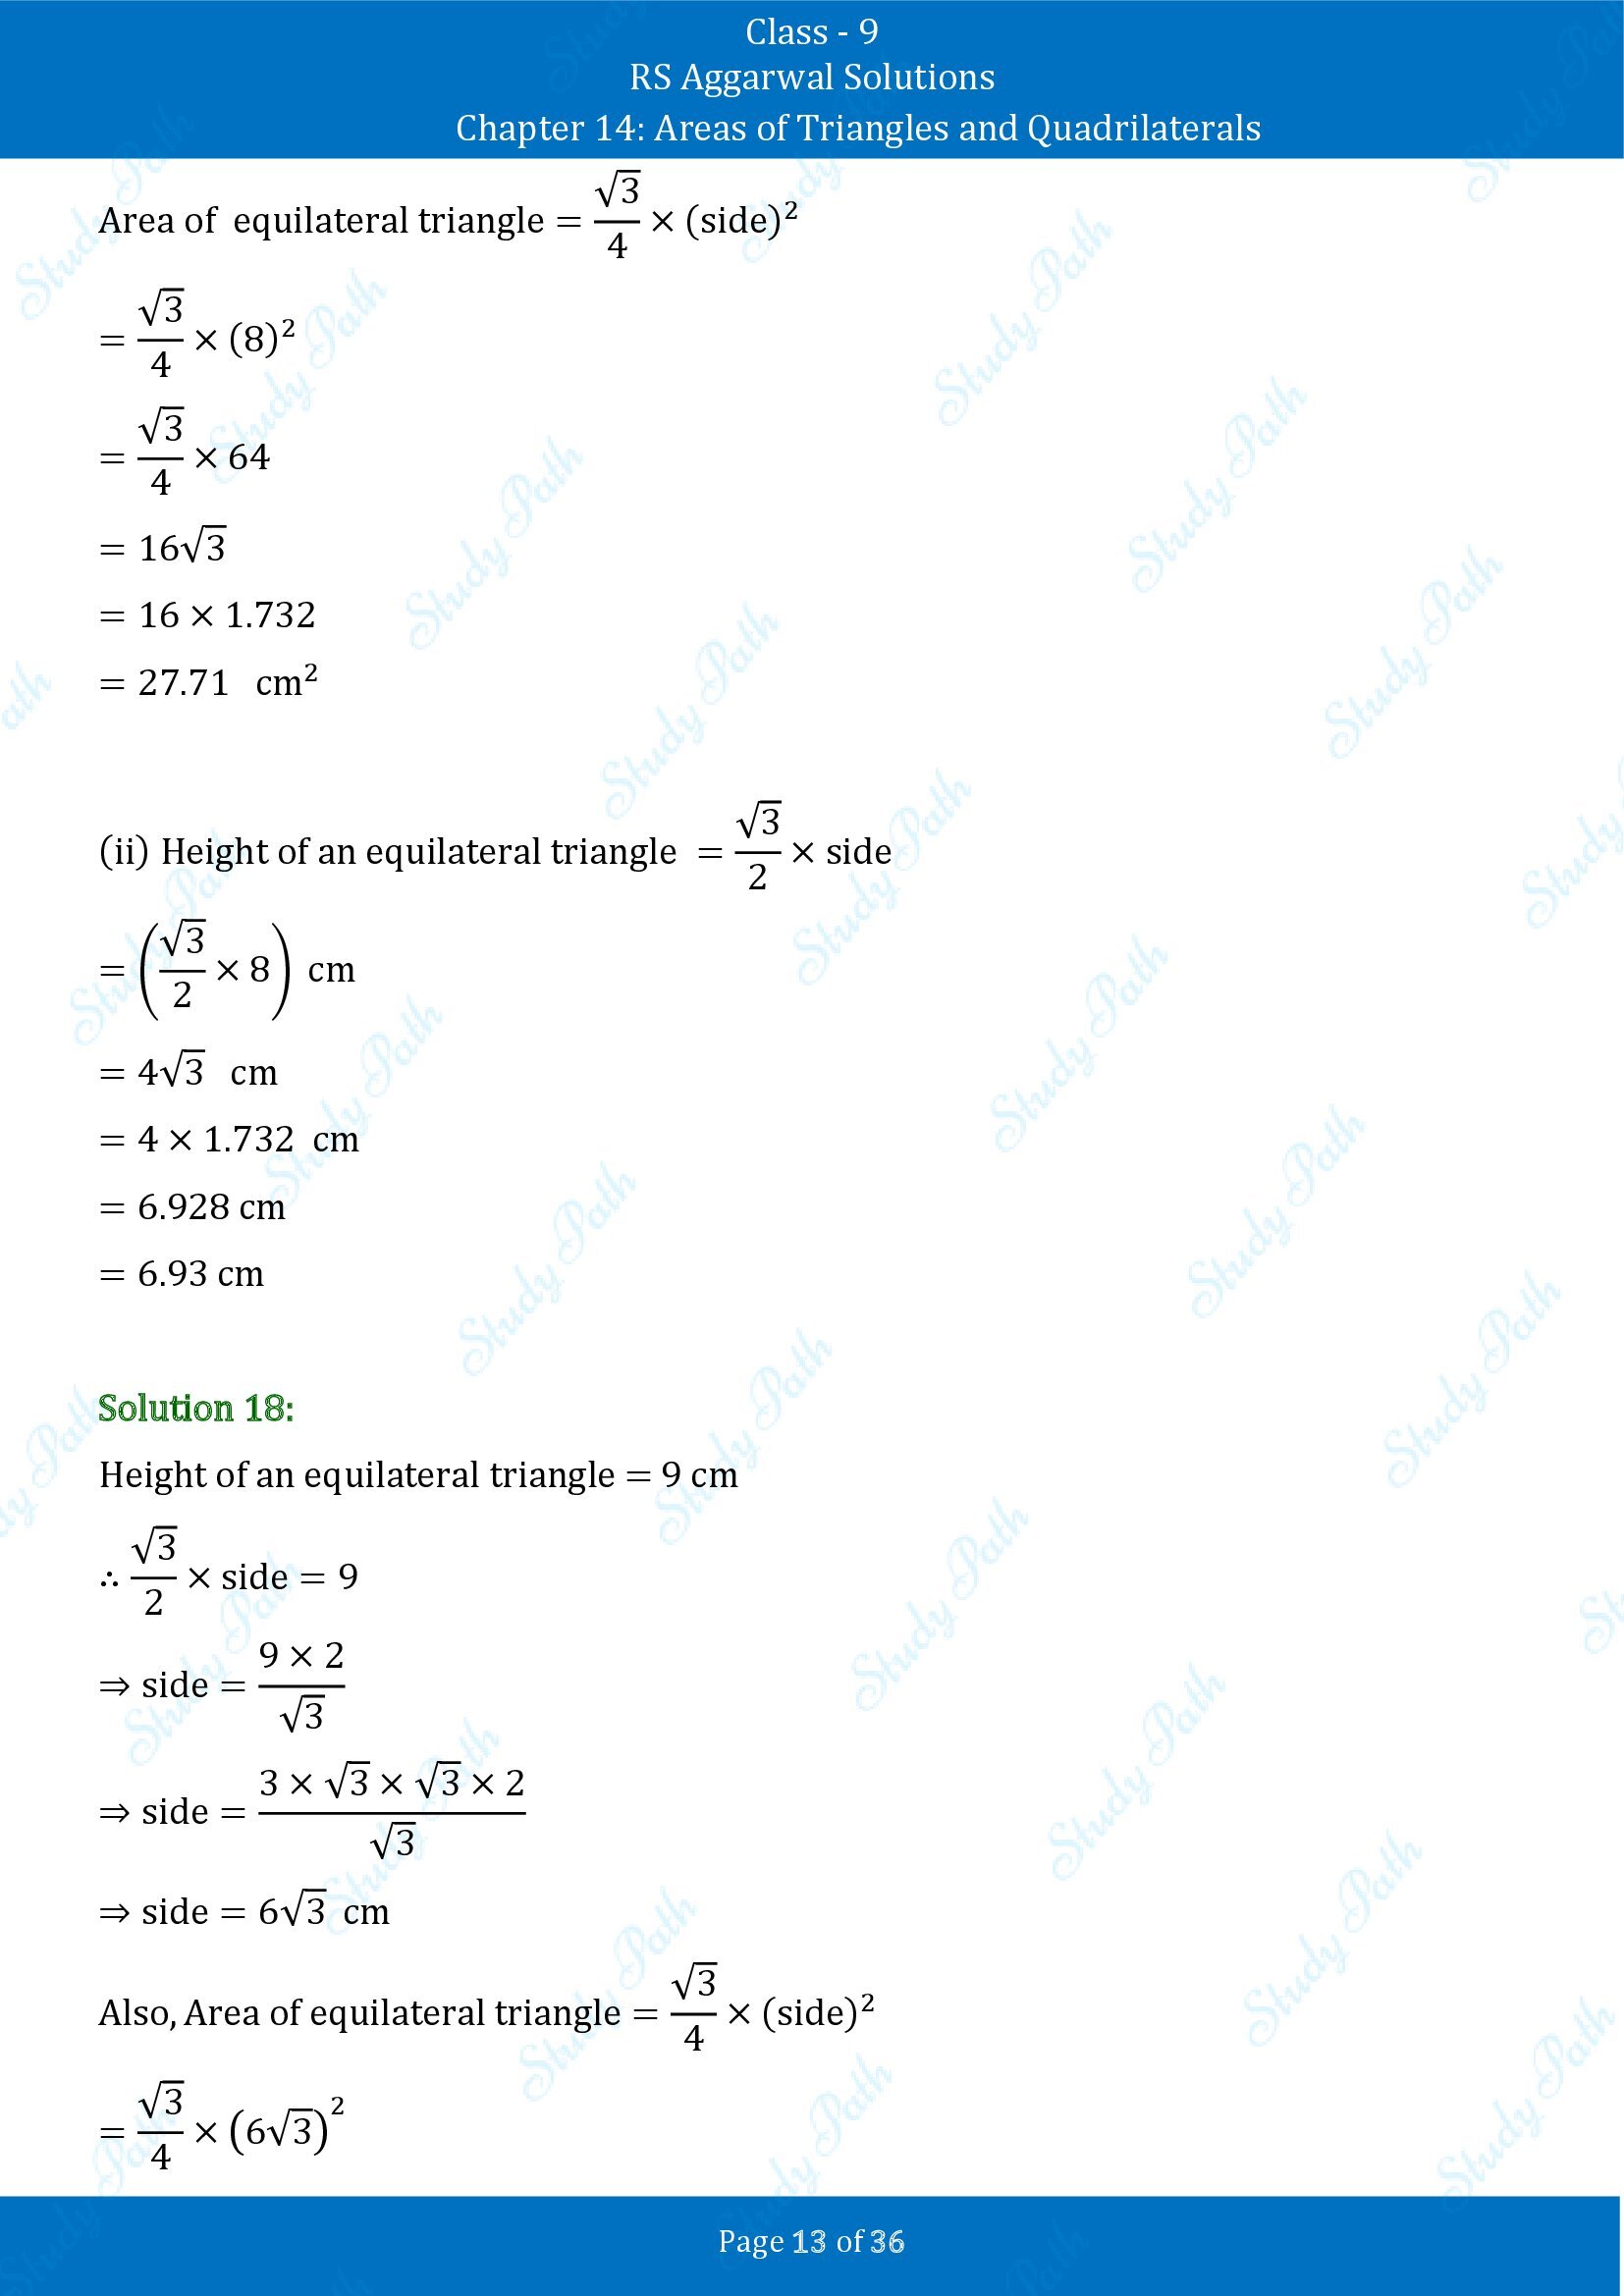 RS Aggarwal Solutions Class 9 Chapter 14 Areas of Triangles and Quadrilaterals Exercise 14 00013